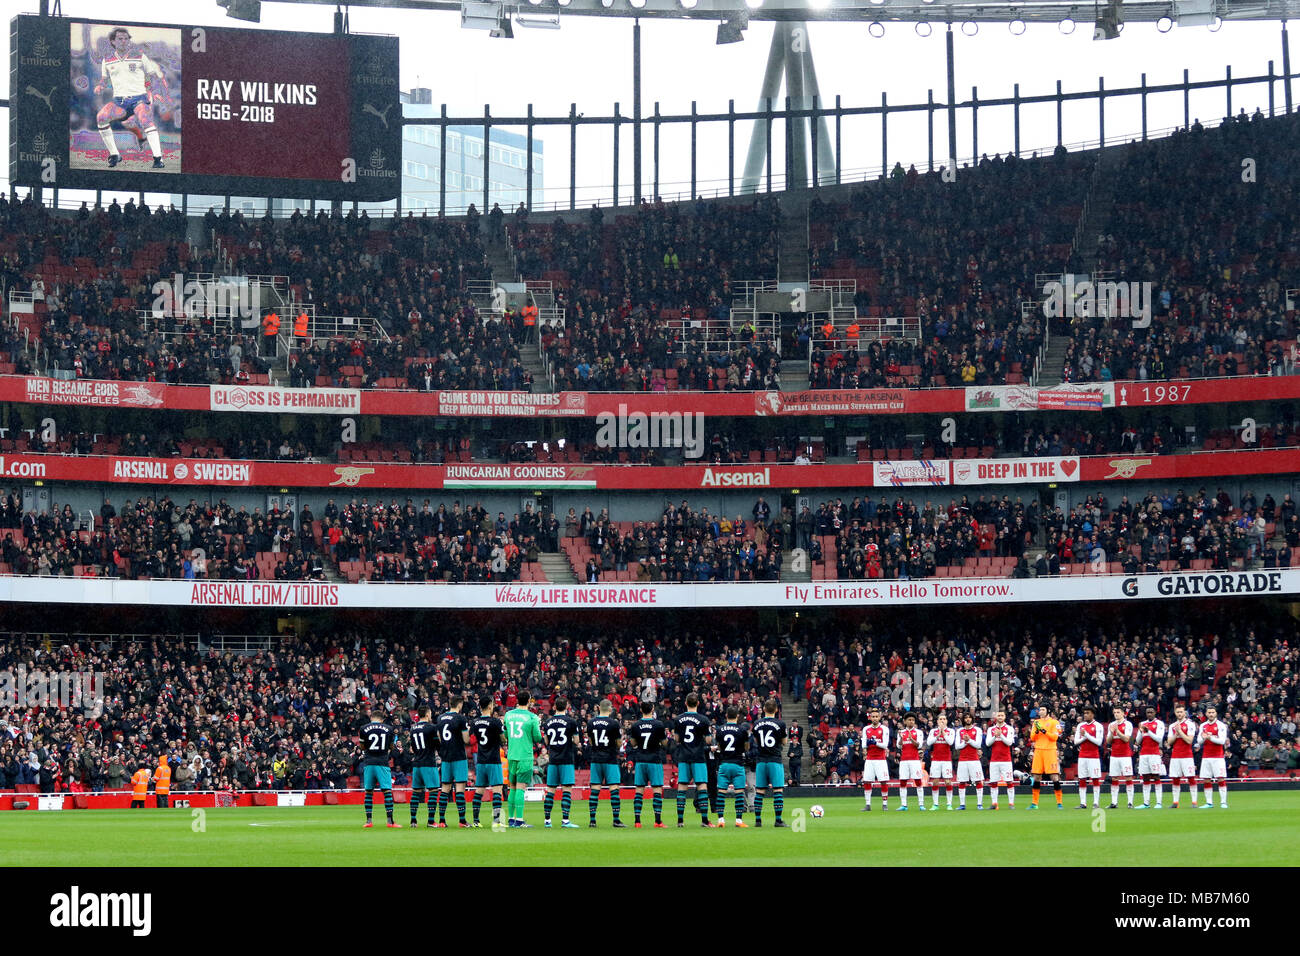 Arsenal and Southampton players during the minutes applause for Ray Wilkins at the Arsenal v Southampton English Premier League game, at The Emirates Stadium, London, on April 8, 2018. **This picture is for EDITORIAL USE ONLY** Stock Photo